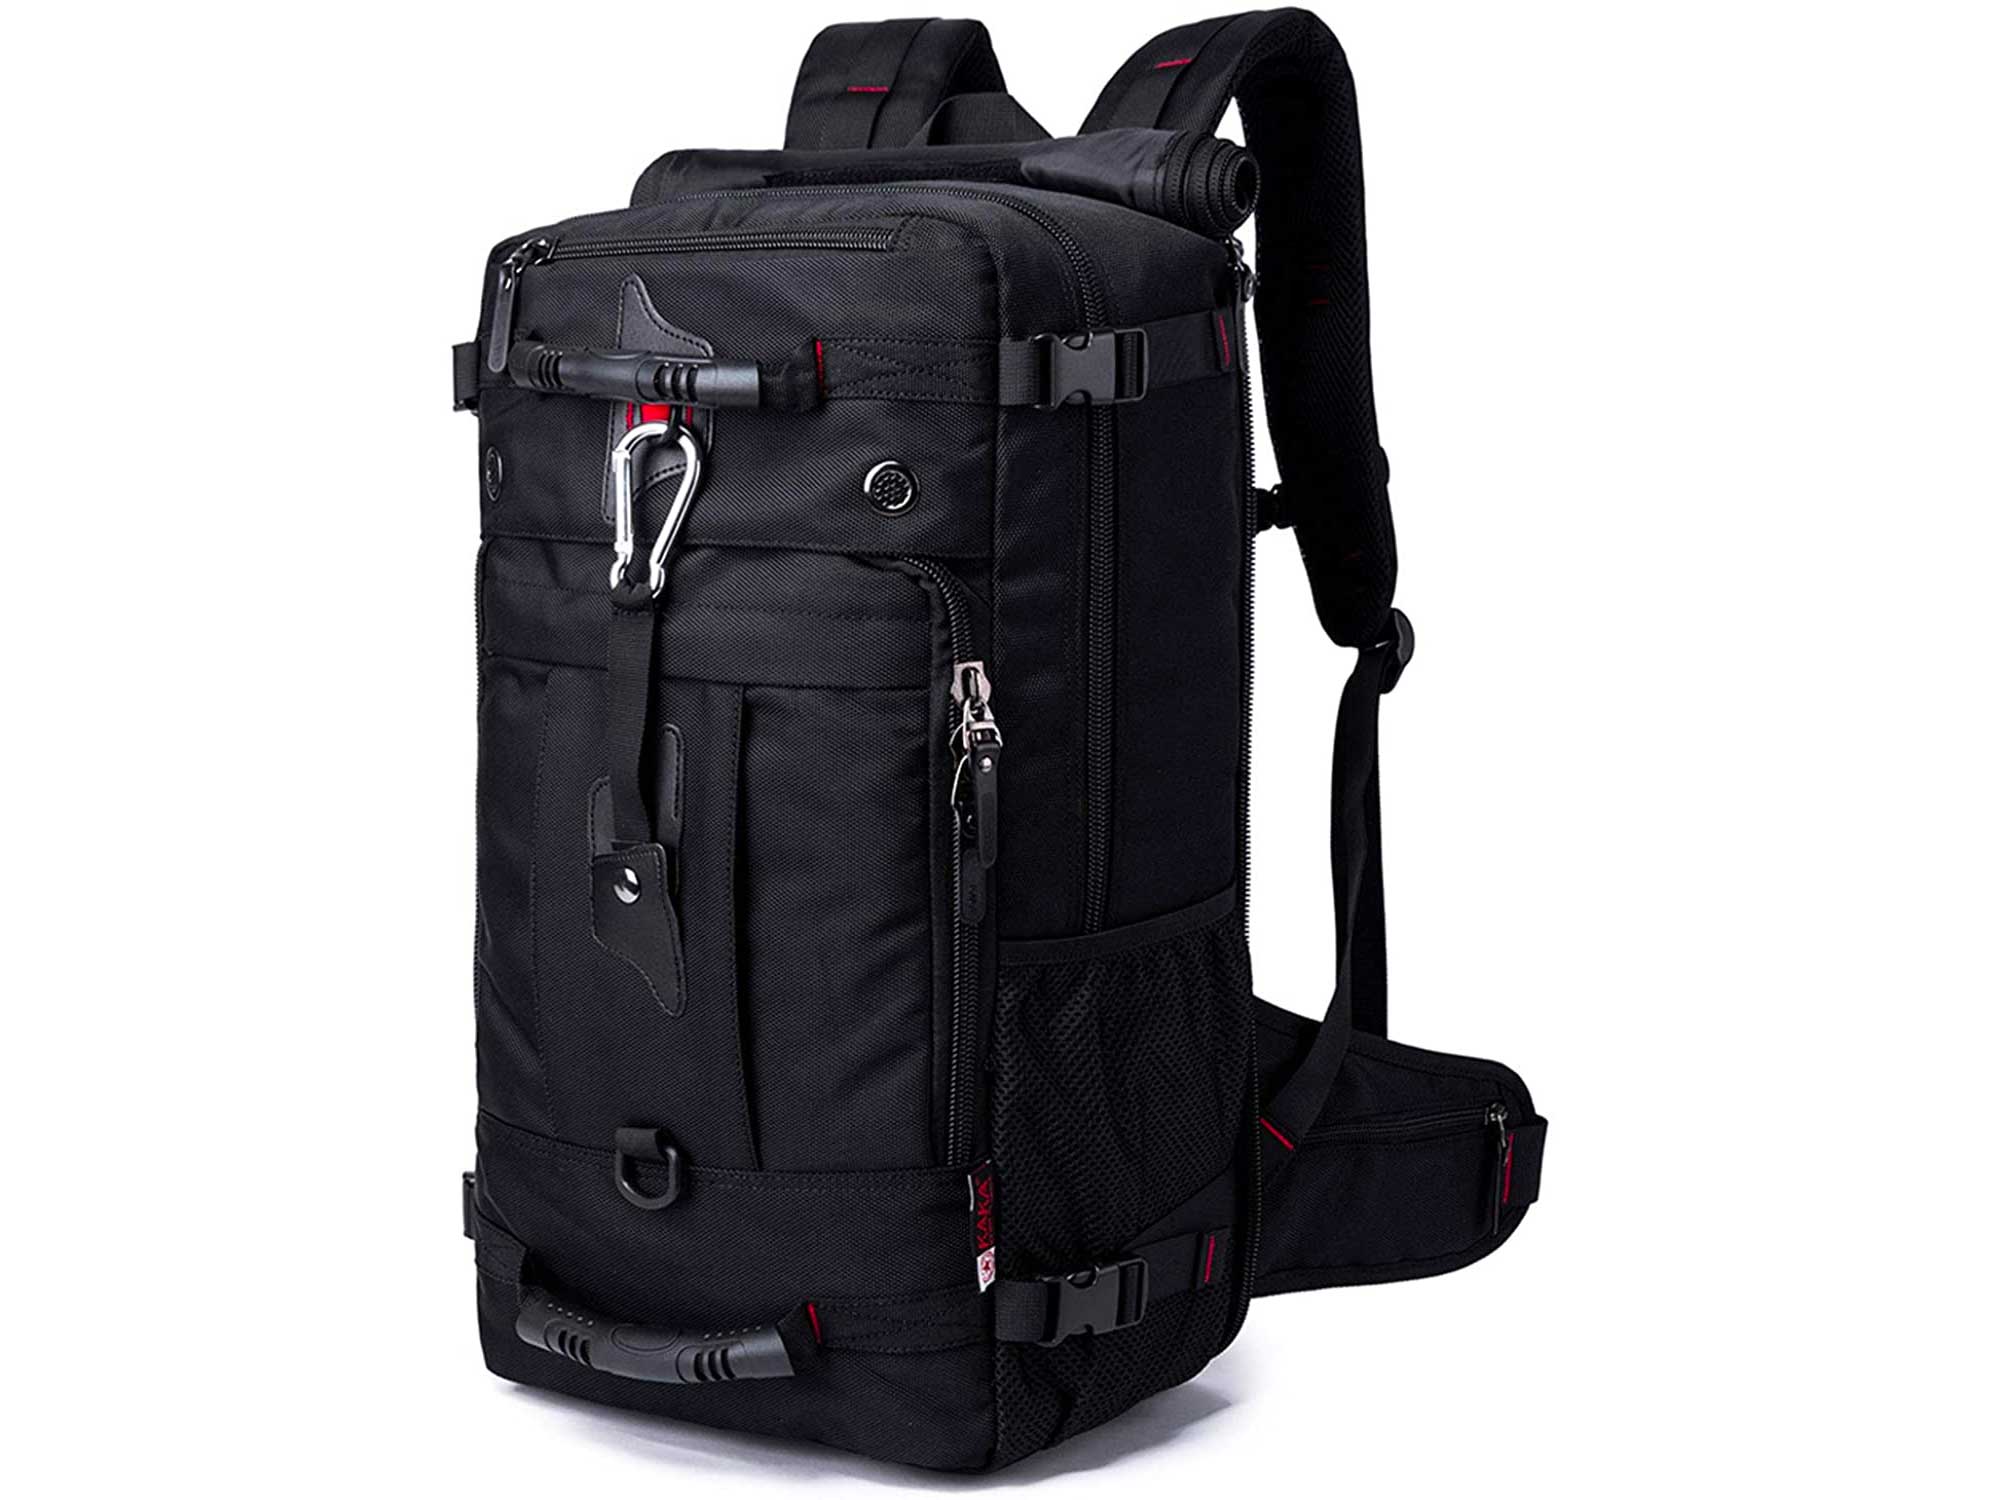 40L Hiking Backpack with Lock,Luggage Travel Daypack Carry-on Weekender Bag Camping